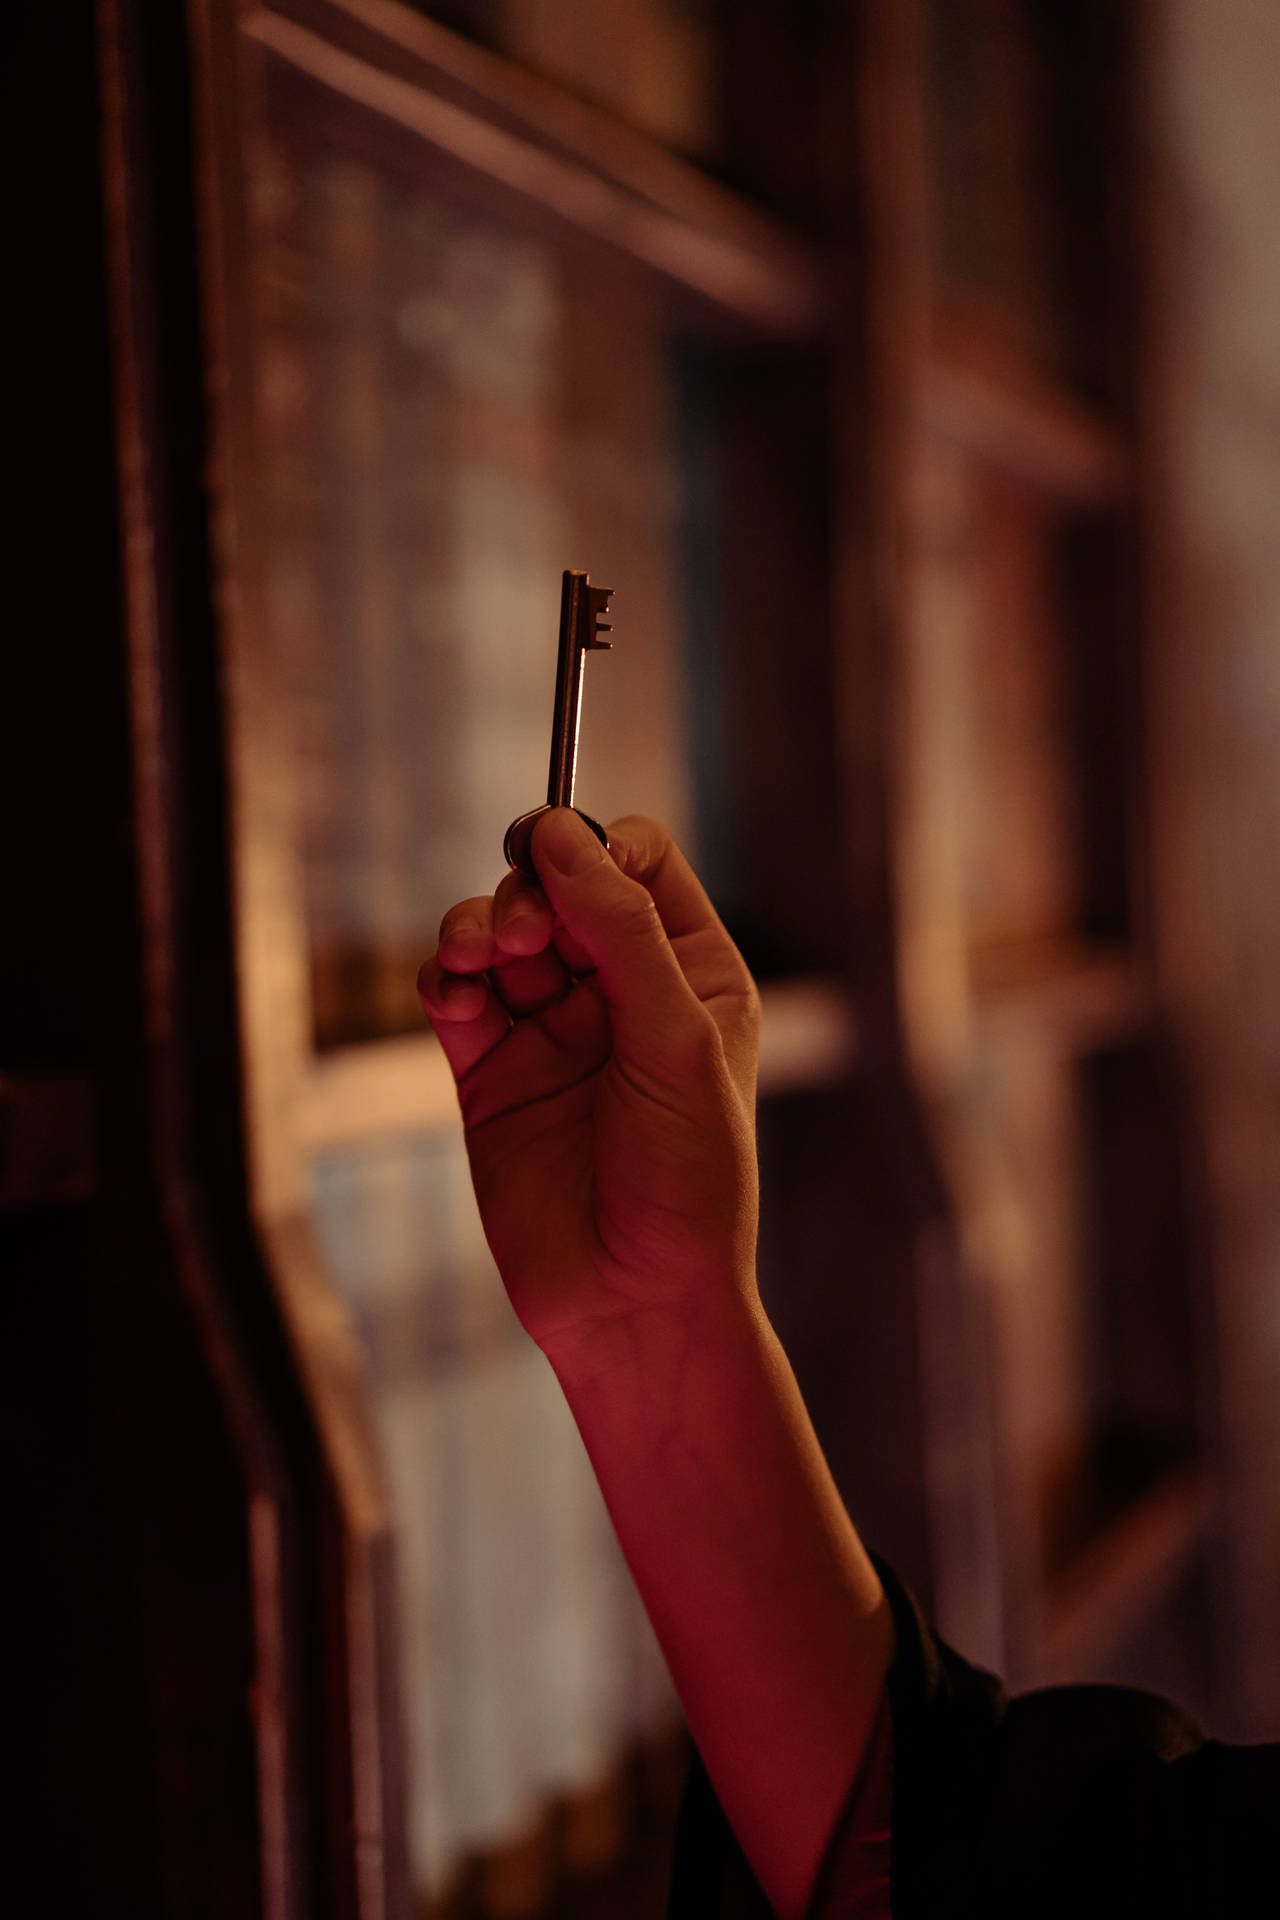 Harry Potter Aesthetic Hand Holding A Key